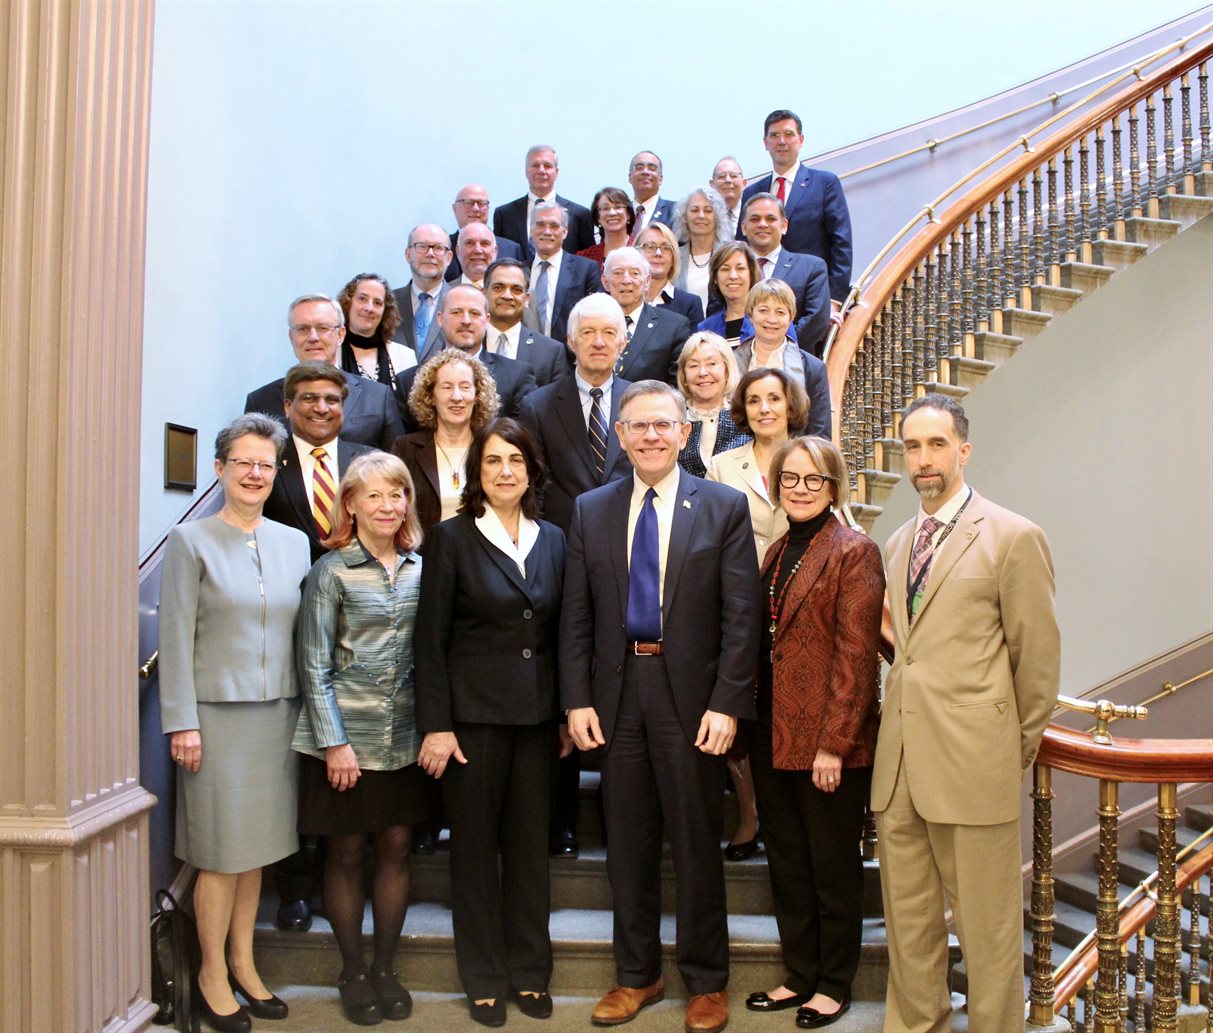 John Veysey (front row, far right) stands with members of the National Science Board (NSB) and the President&rsquo;s Council of Advisors on Science and Technology (PCAST) under the Trump administration, in the Eisenhower Executive Office Building in Washington, D.C. Pictured are (front row, left to right) Julia Phillips (NSB), Geri Richmond (NSB), Diane Souvaine (then NSB chair), Kelvin Droegemeier (then director of the White House&rsquo;s Office of Science and Technology Policy, PCAST chair), Catherine Bessant (PCAST), and John Veysey; (Row 2) Sethuraman Panchanathan (now National Science Foundation director, then NSB), K. Birgitta Whaley (PCAST), France C&oacute;rdova (former NSF director and NSB); (Row 3) John Anderson (NSB, now president National Academy of Engineering), Shannon D. Blunt (NSB), Roger Beachy (NSB), Anneila Sargent (NSB); (Row 4) Maureen Condic (NSB), Suresh Garimella (NSB), Arthur &ldquo;Artie&rdquo; Bienenstock (NSB), Maria Zuber (NSB, now chair of PCAST); (Row 5) Dan Reed &nbsp;(NSB), Steven Leath (NSB), Bob Groves (NSB), Dorota Grejner-Brzezinska (NSB), Ellen Ochoa (then NSB vice-chair, now chair); (Row 6) Shane Wall (PCAST), Sharon Hrynkow (PCAST), Vicki Chandler (NSB), A.N. Sreeram (PCAST); (Row 7) G.P. &ldquo;Bud&rdquo; Peterson (NSB), Victor &ldquo;Vic&rdquo; McCrary (now NSB Vice-Chair), W. Carl Lineberger (NSB), Ed McGinnis (PCAST executive director). Photo submitted